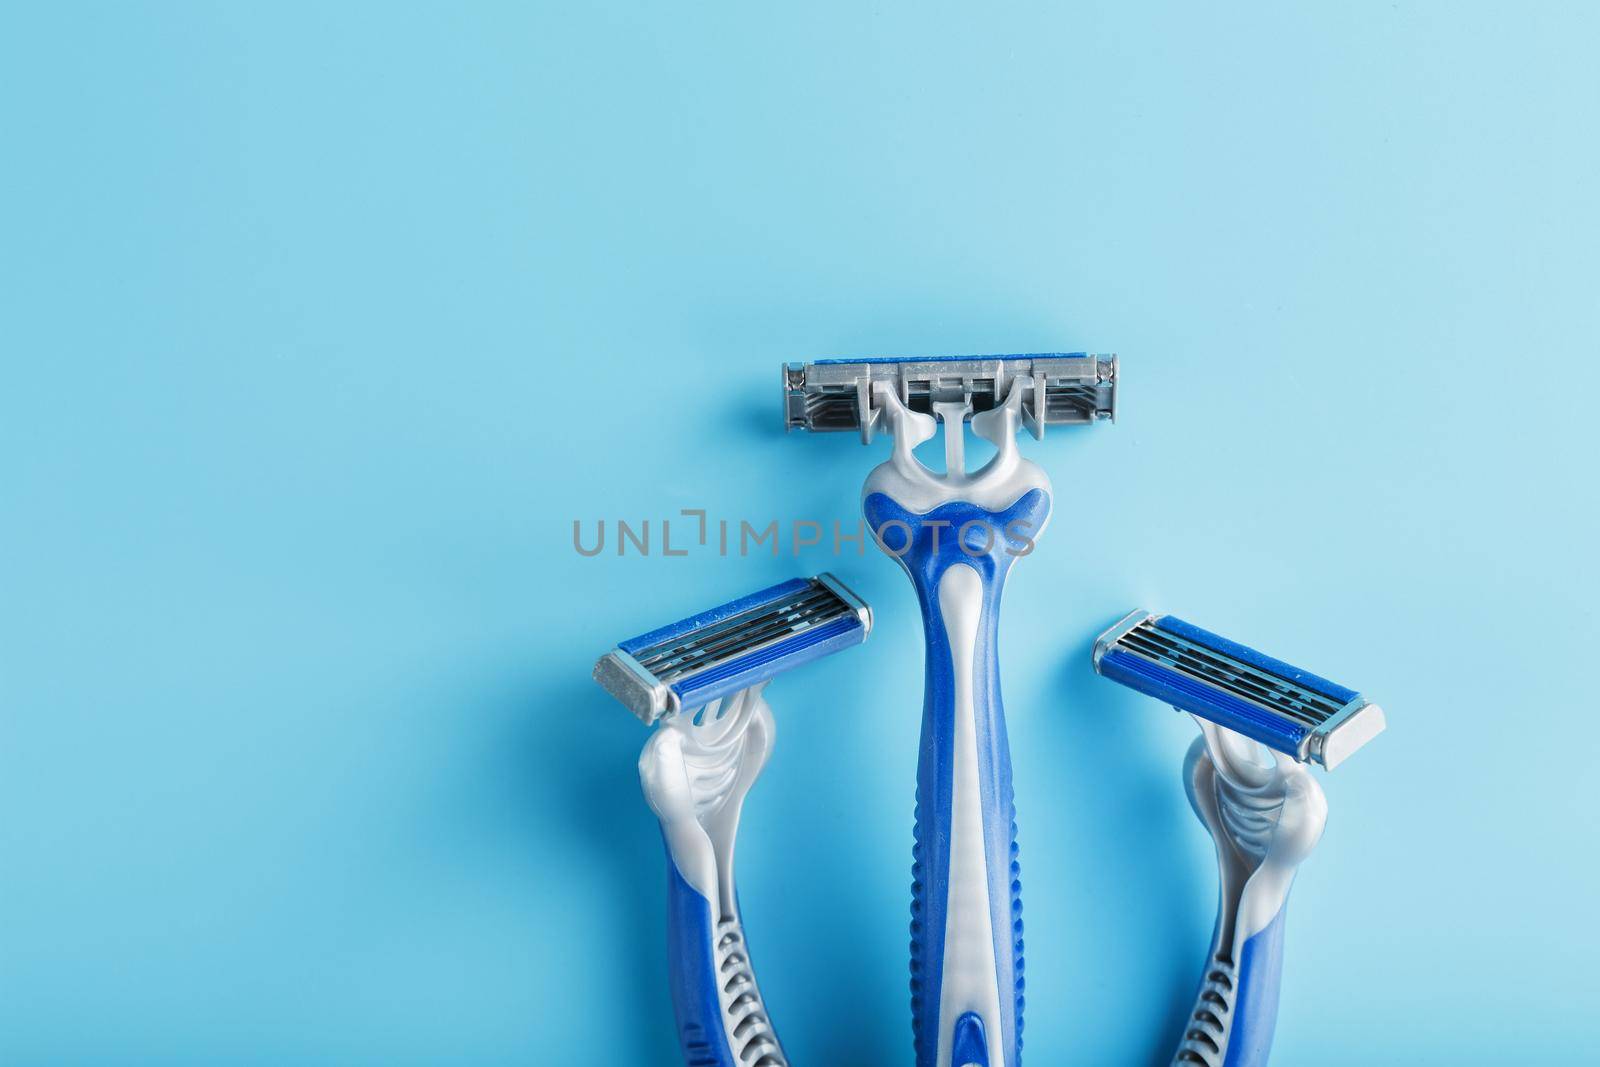 Blue shaving machines in a row on a blue background with ice cubes by AlexGrec